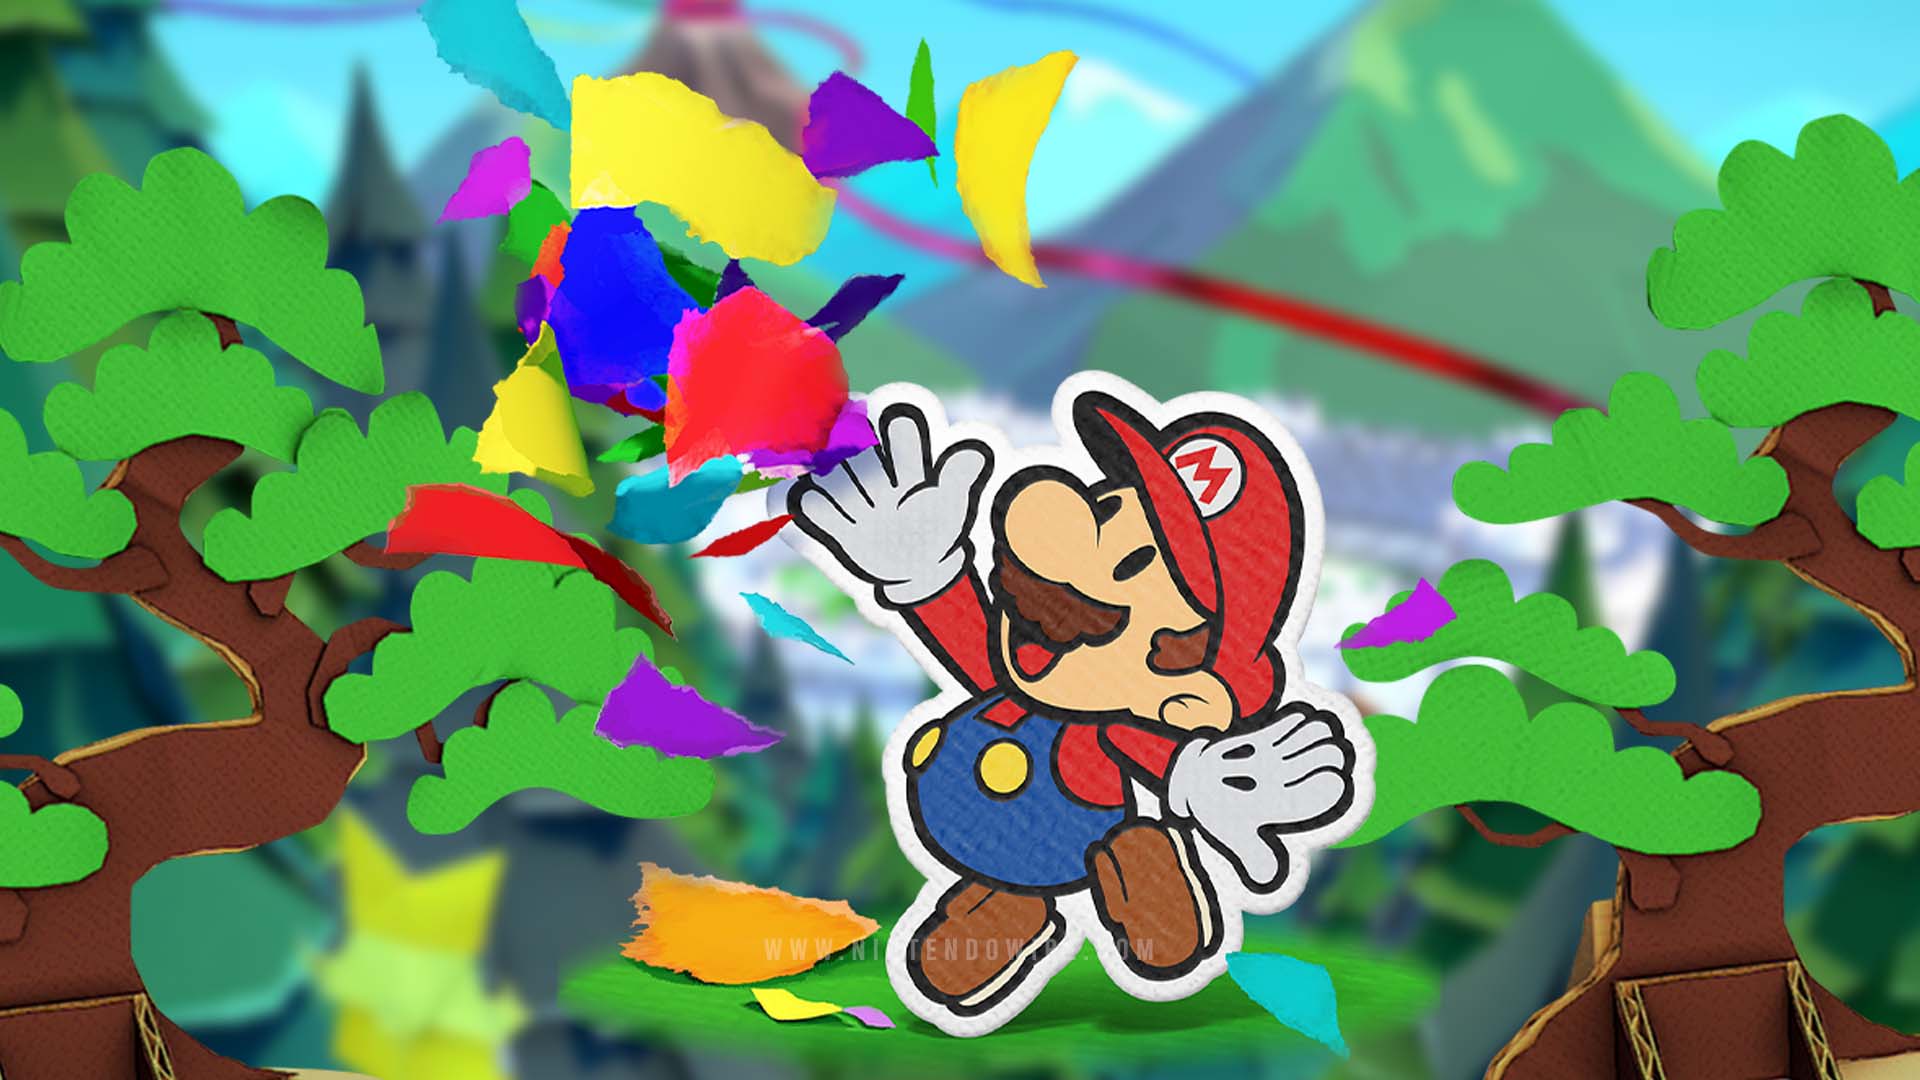 Check out two new Paper Mario: The Origami King commercials.